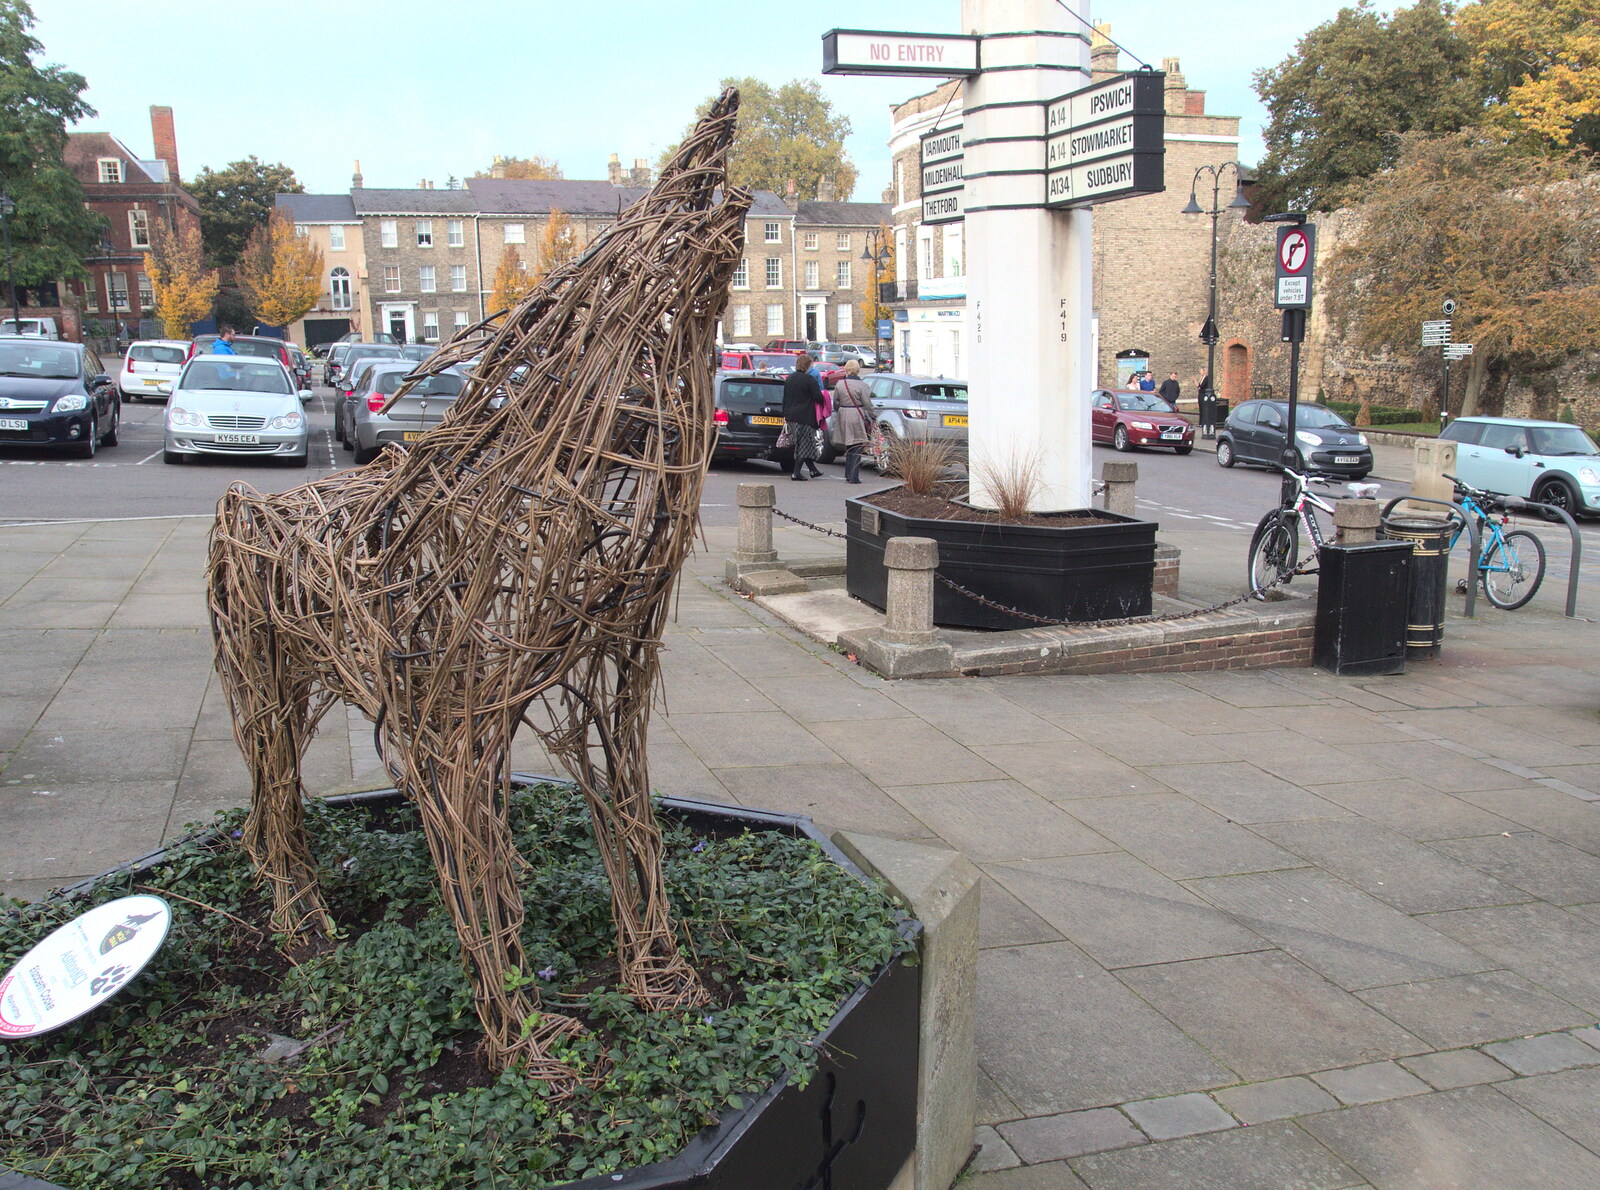 A wicker wolf on Abbeygate Street from Abbey Gardens in Autumn, Bury St. Edmunds, Suffolk - 27th October 2015